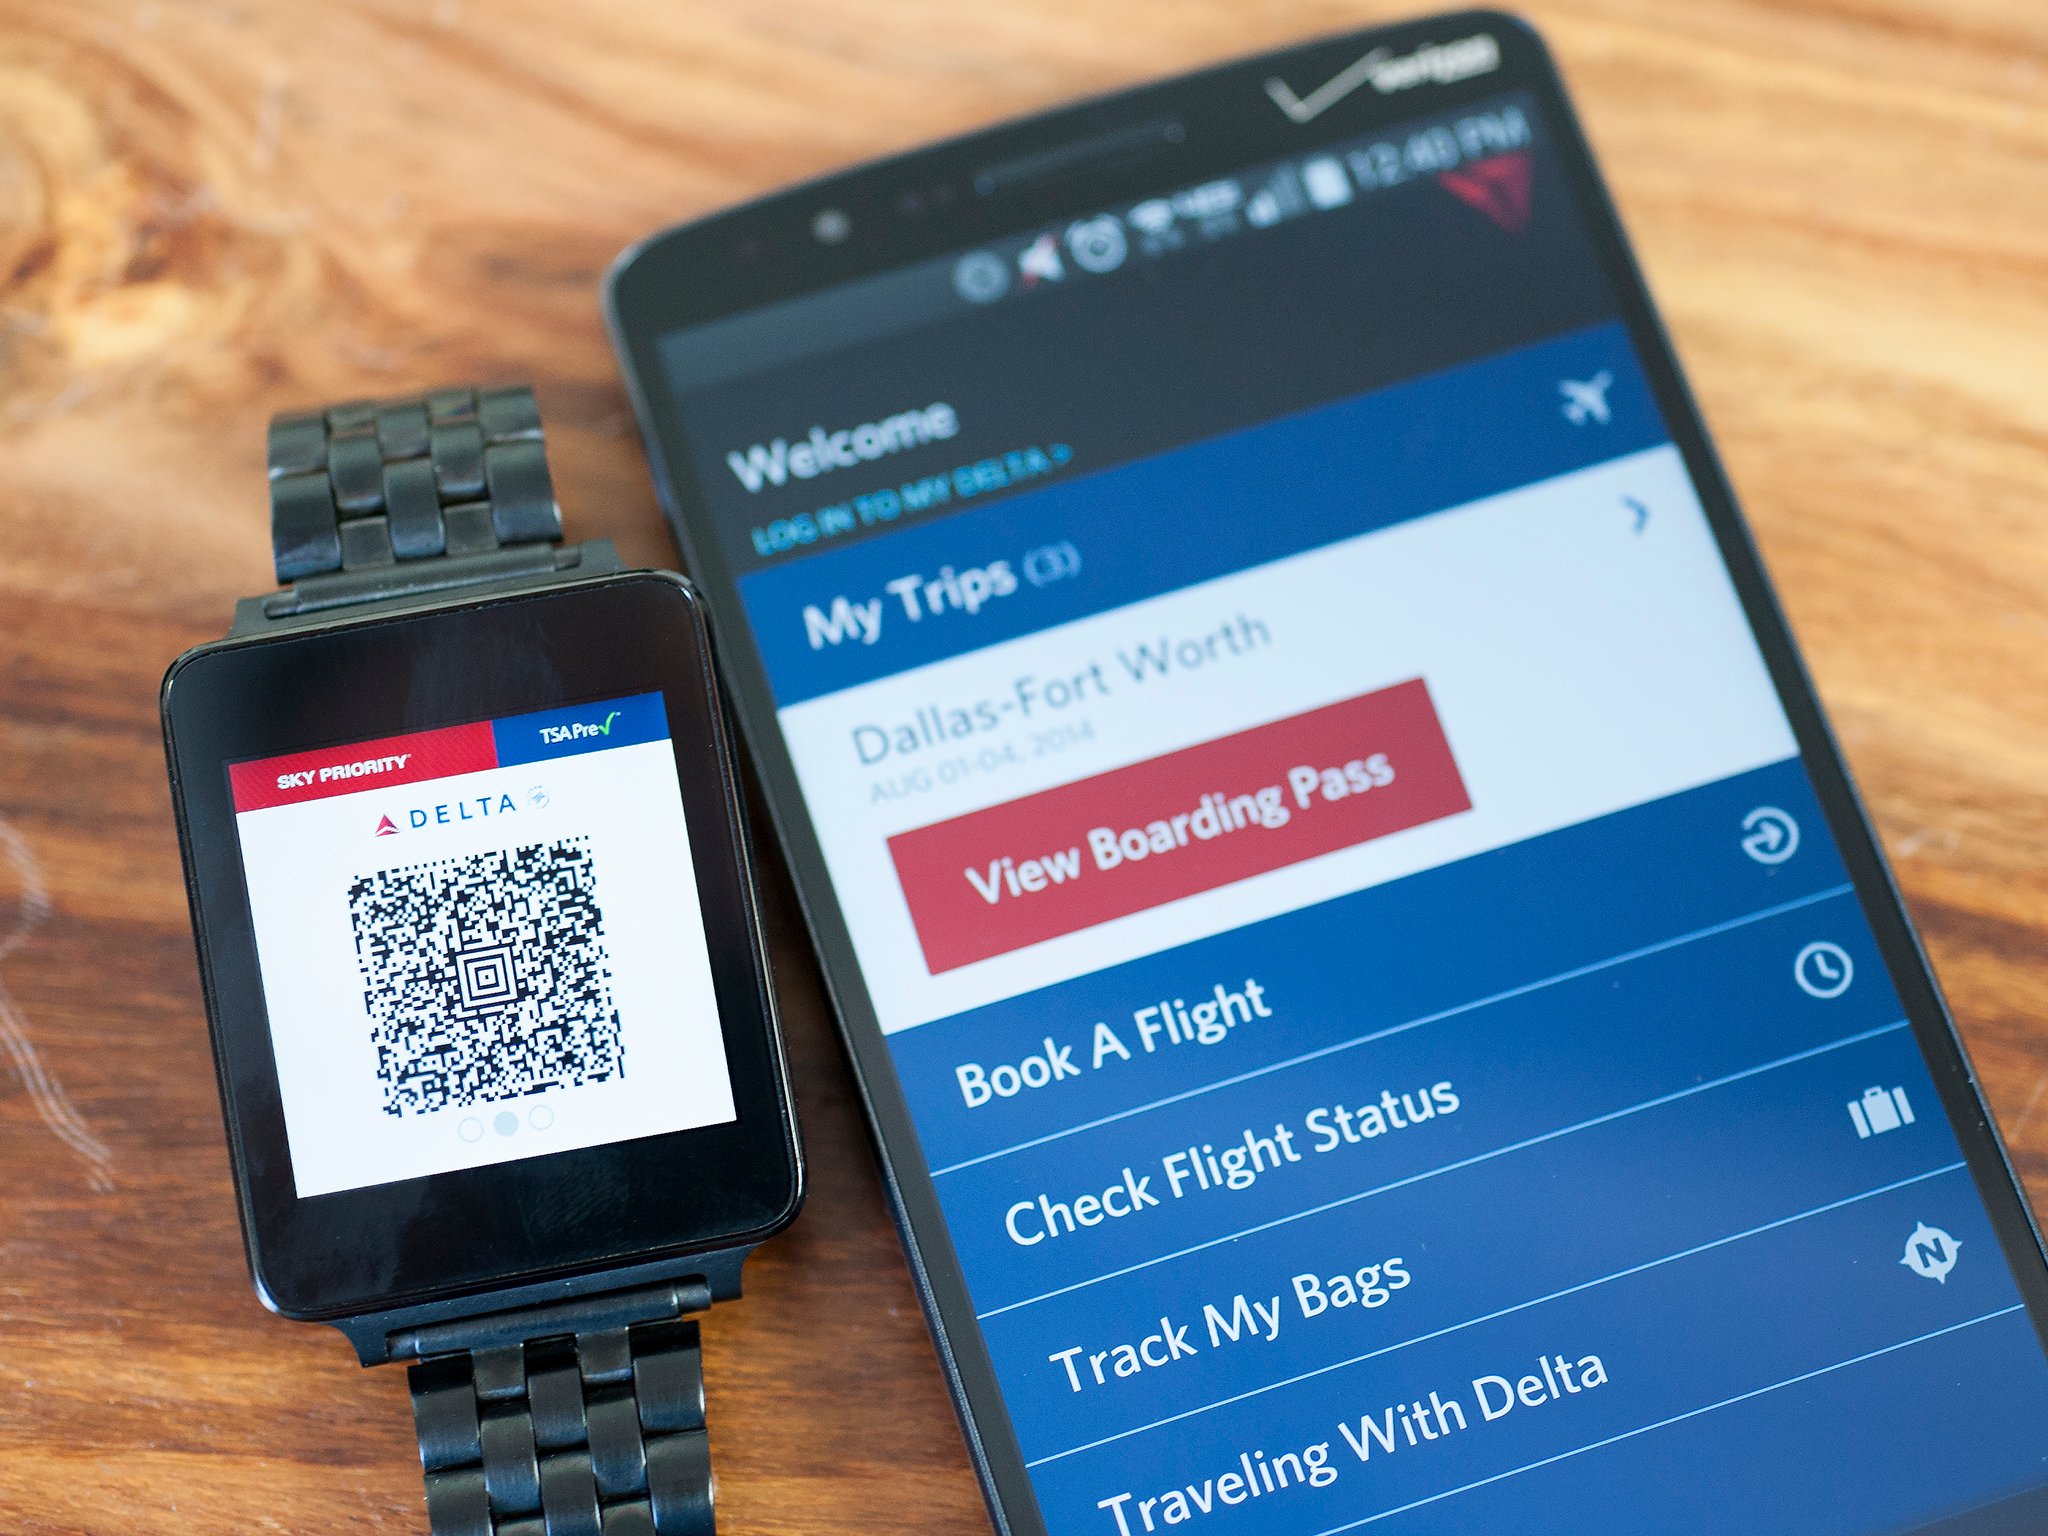 Delta Boarding Pass on Android Wear